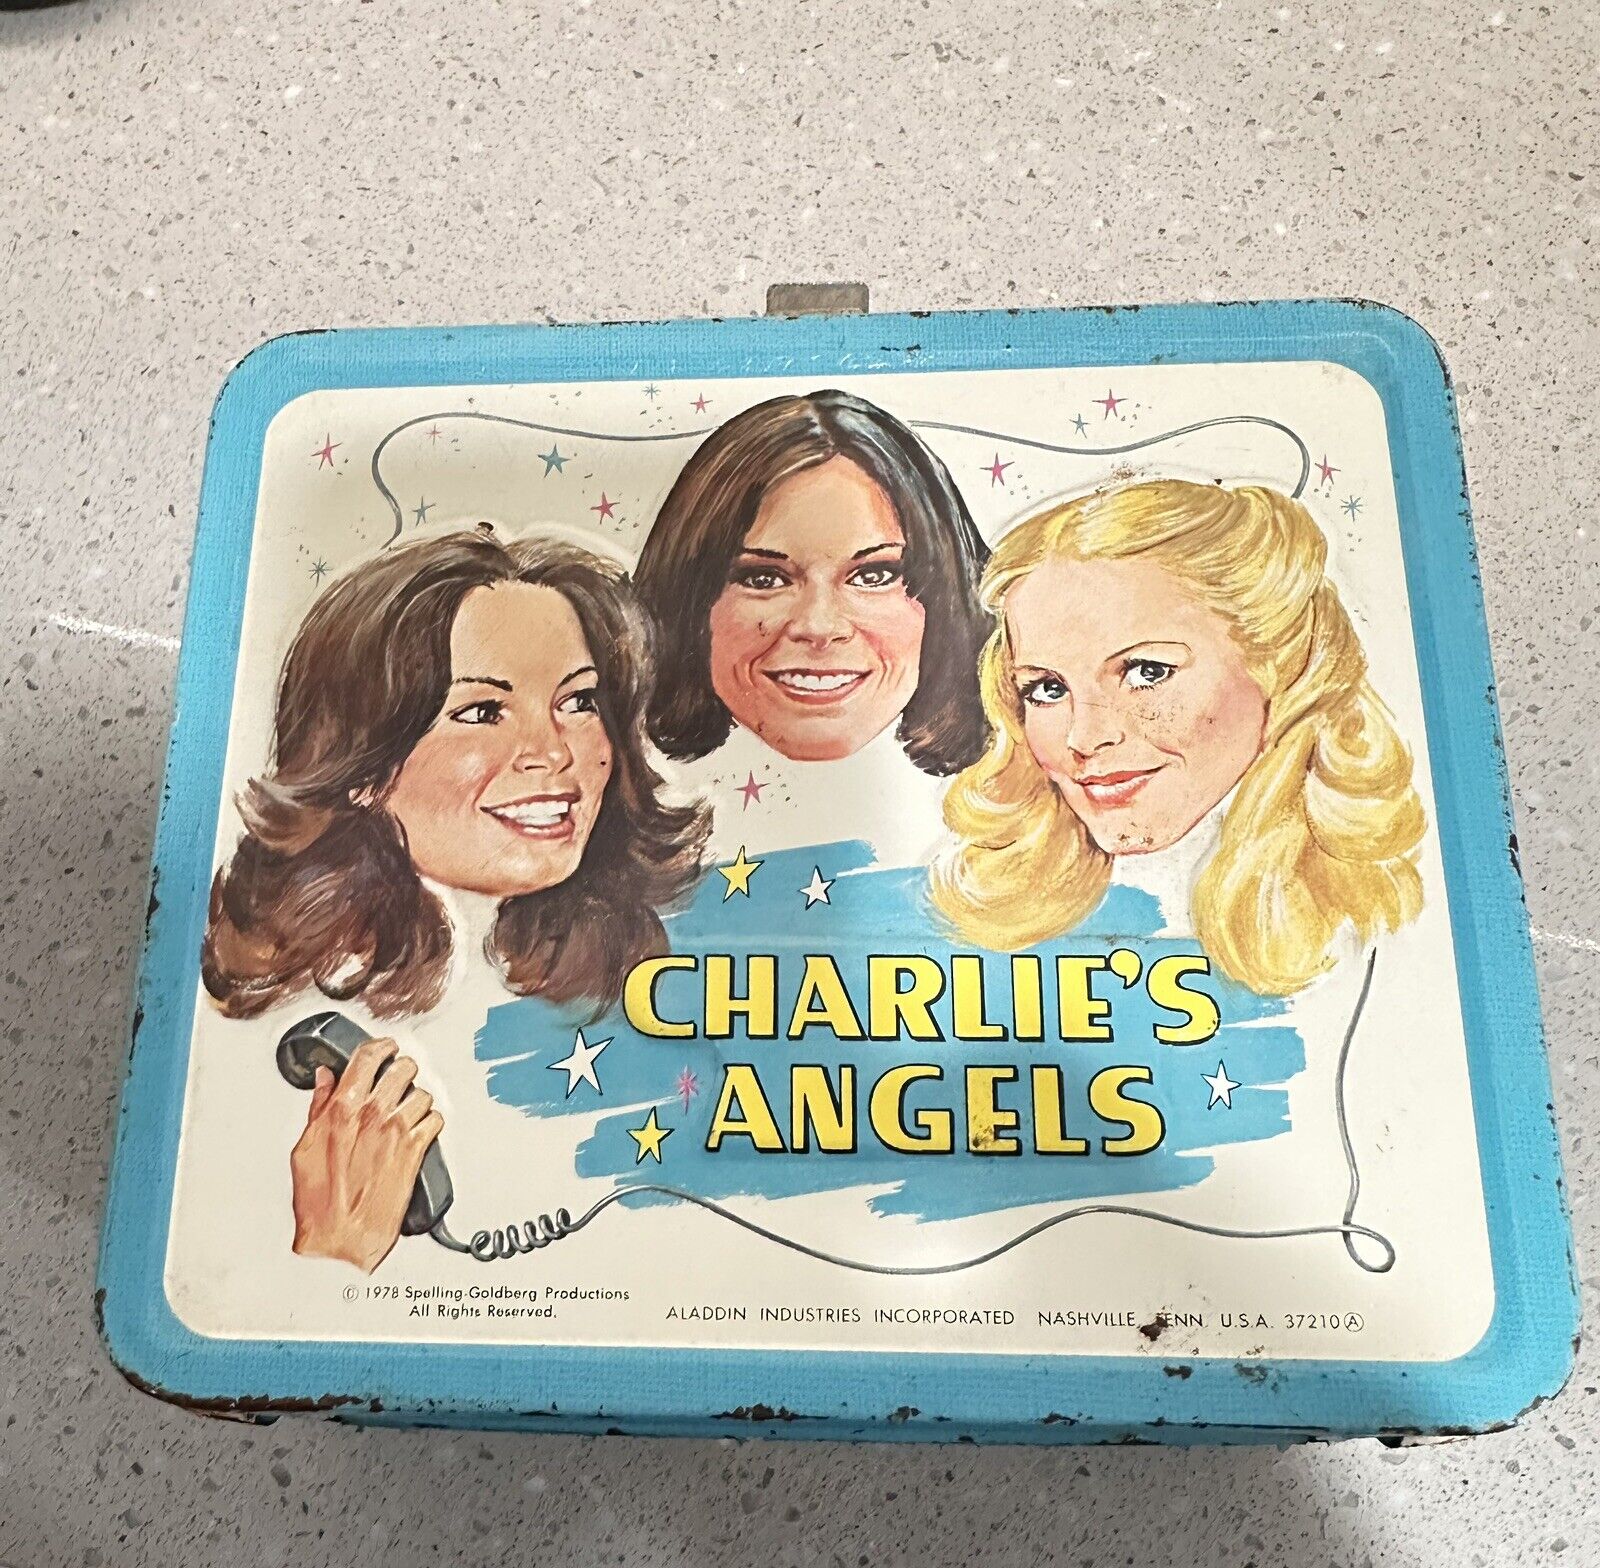 1978 Aladdin Charlie's Angels Vintage Metal Lunchbox with Thermos. Pre-owned 